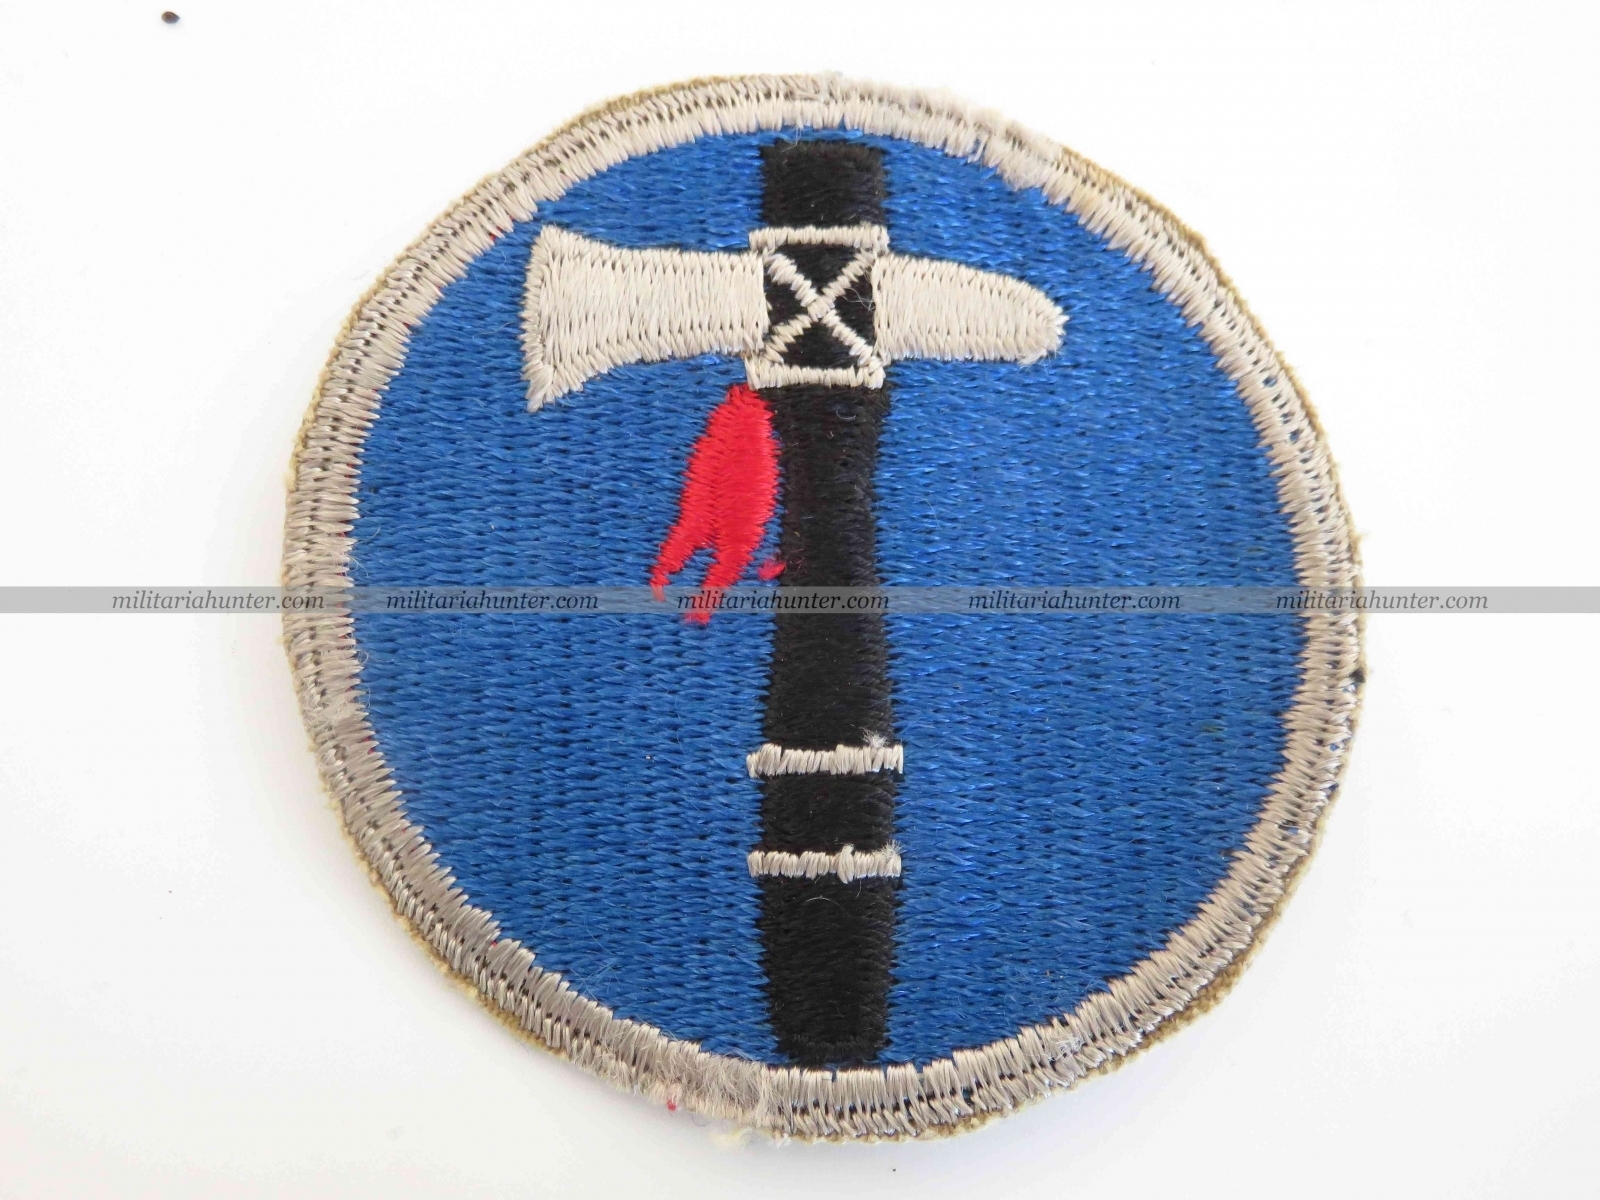 militaria : ON HOLD / Reserve US Army WW2 XIX Corps patch